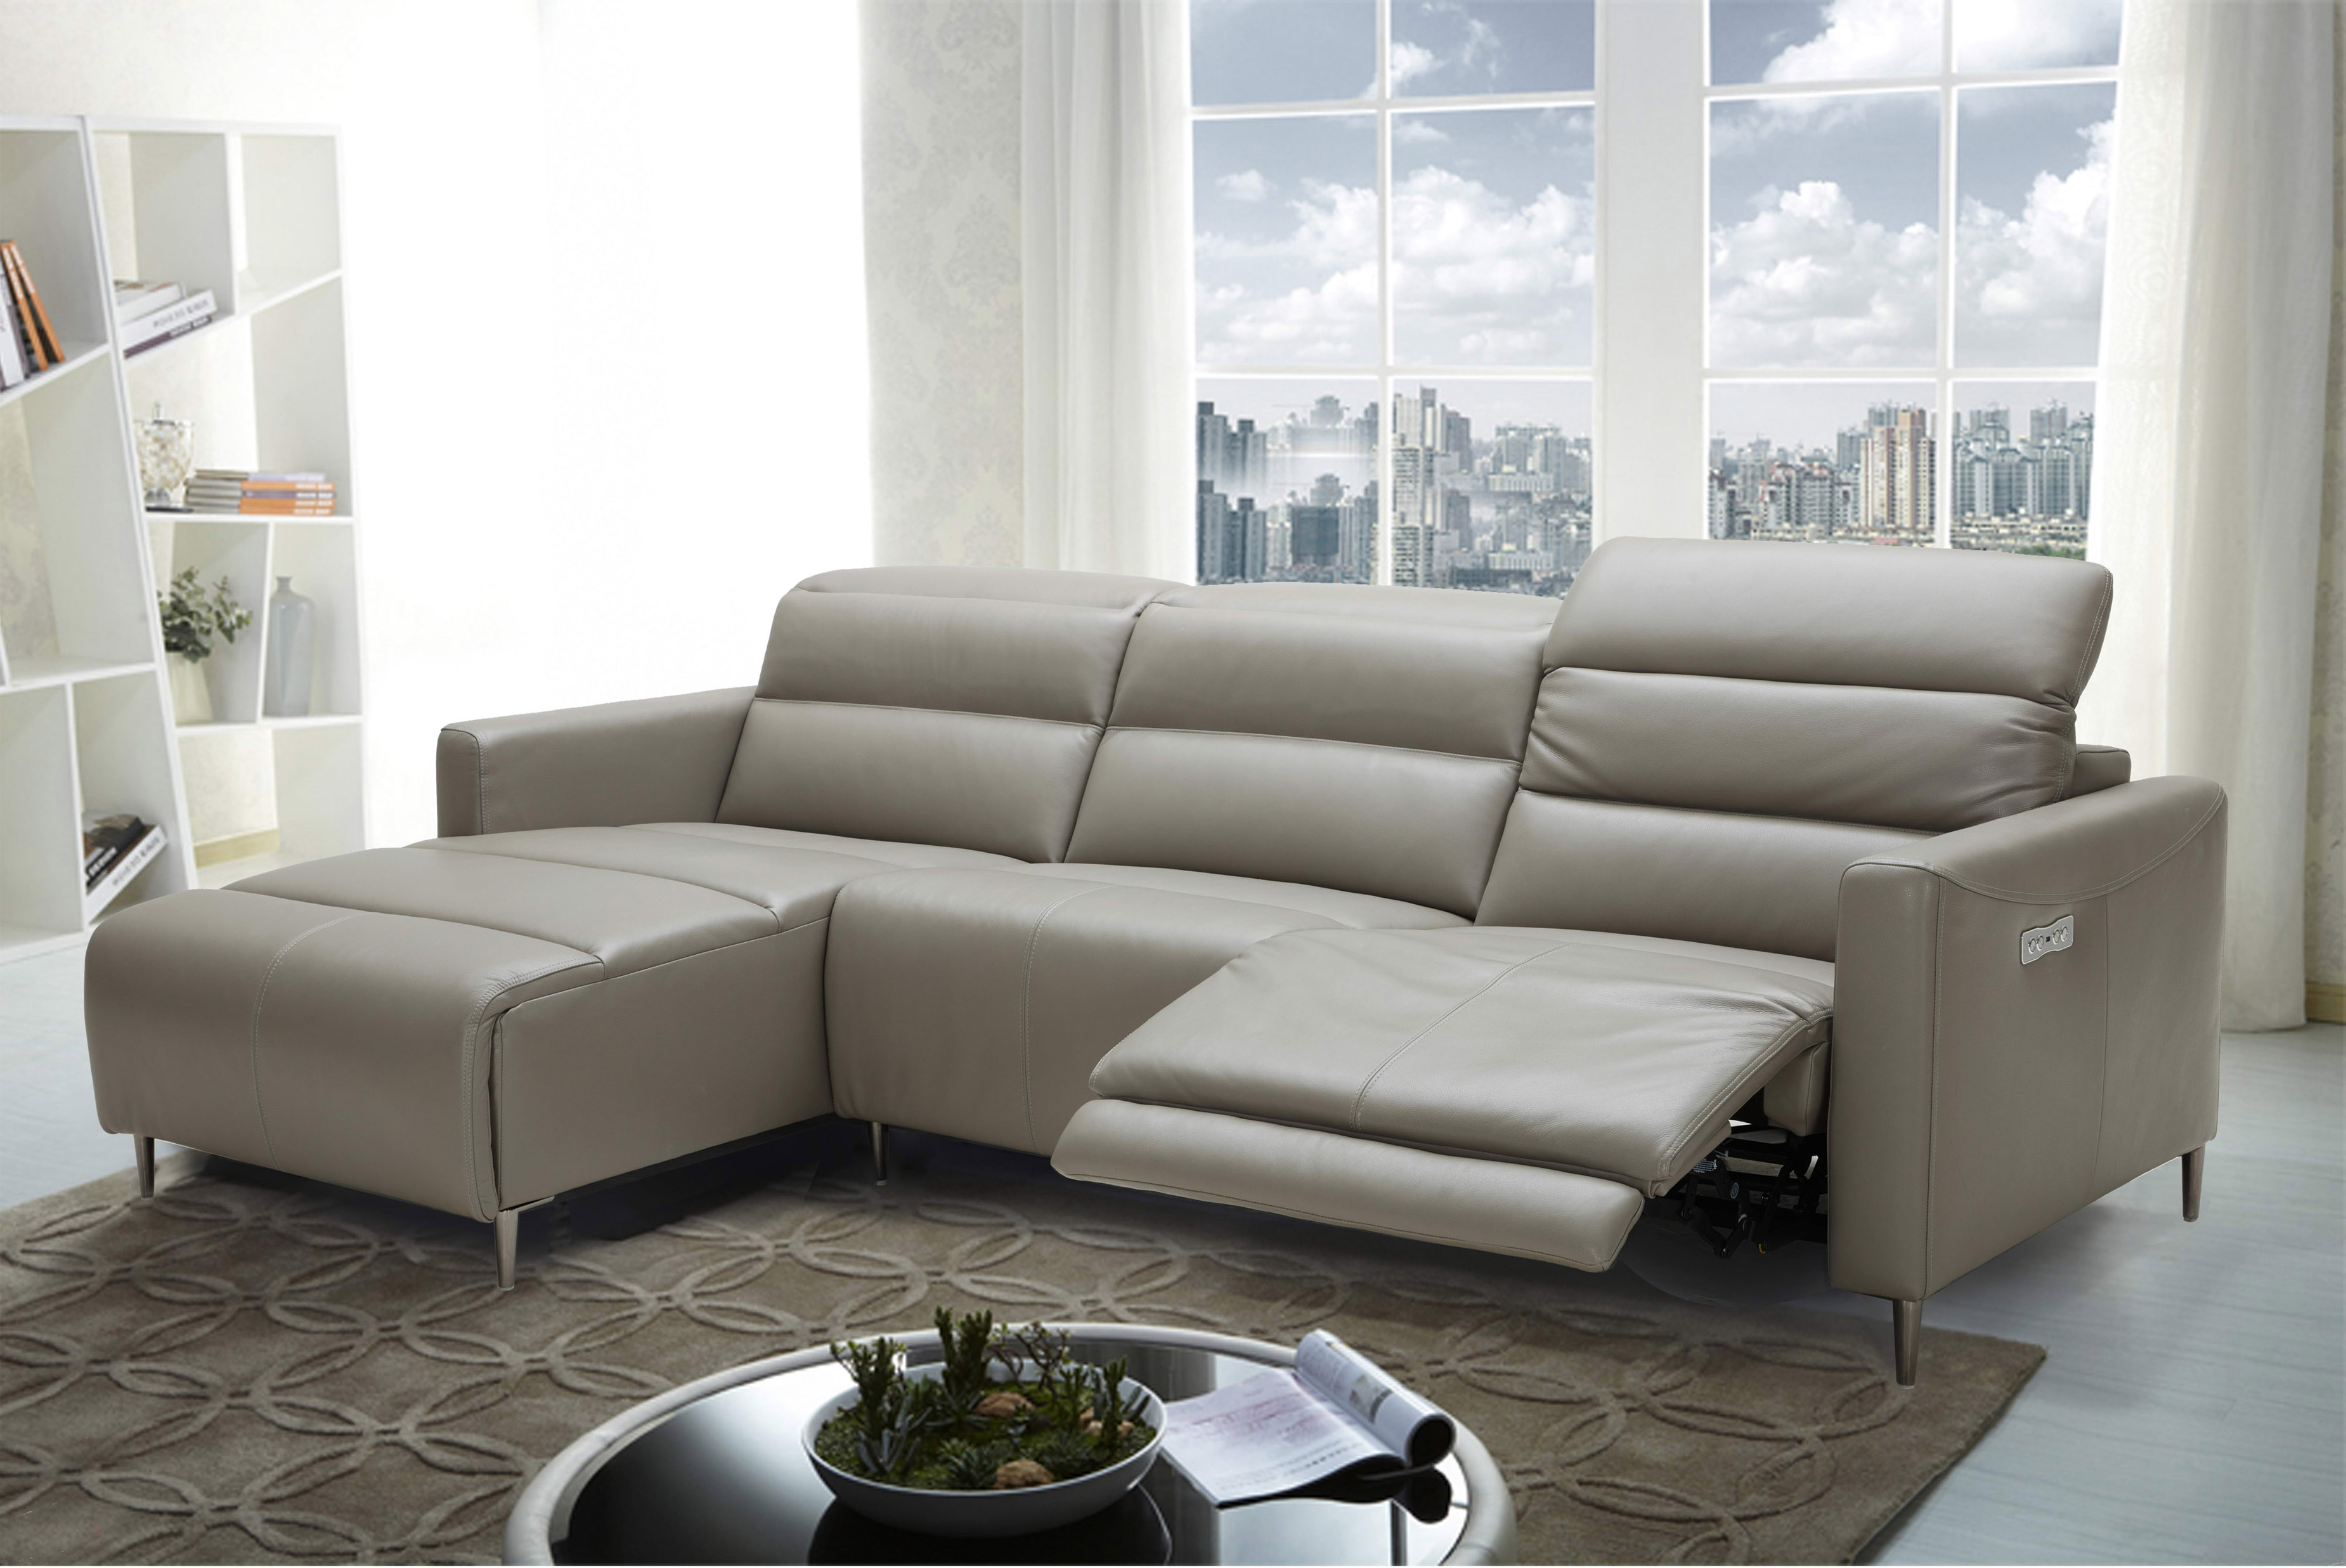 milan leather living room furniture collection